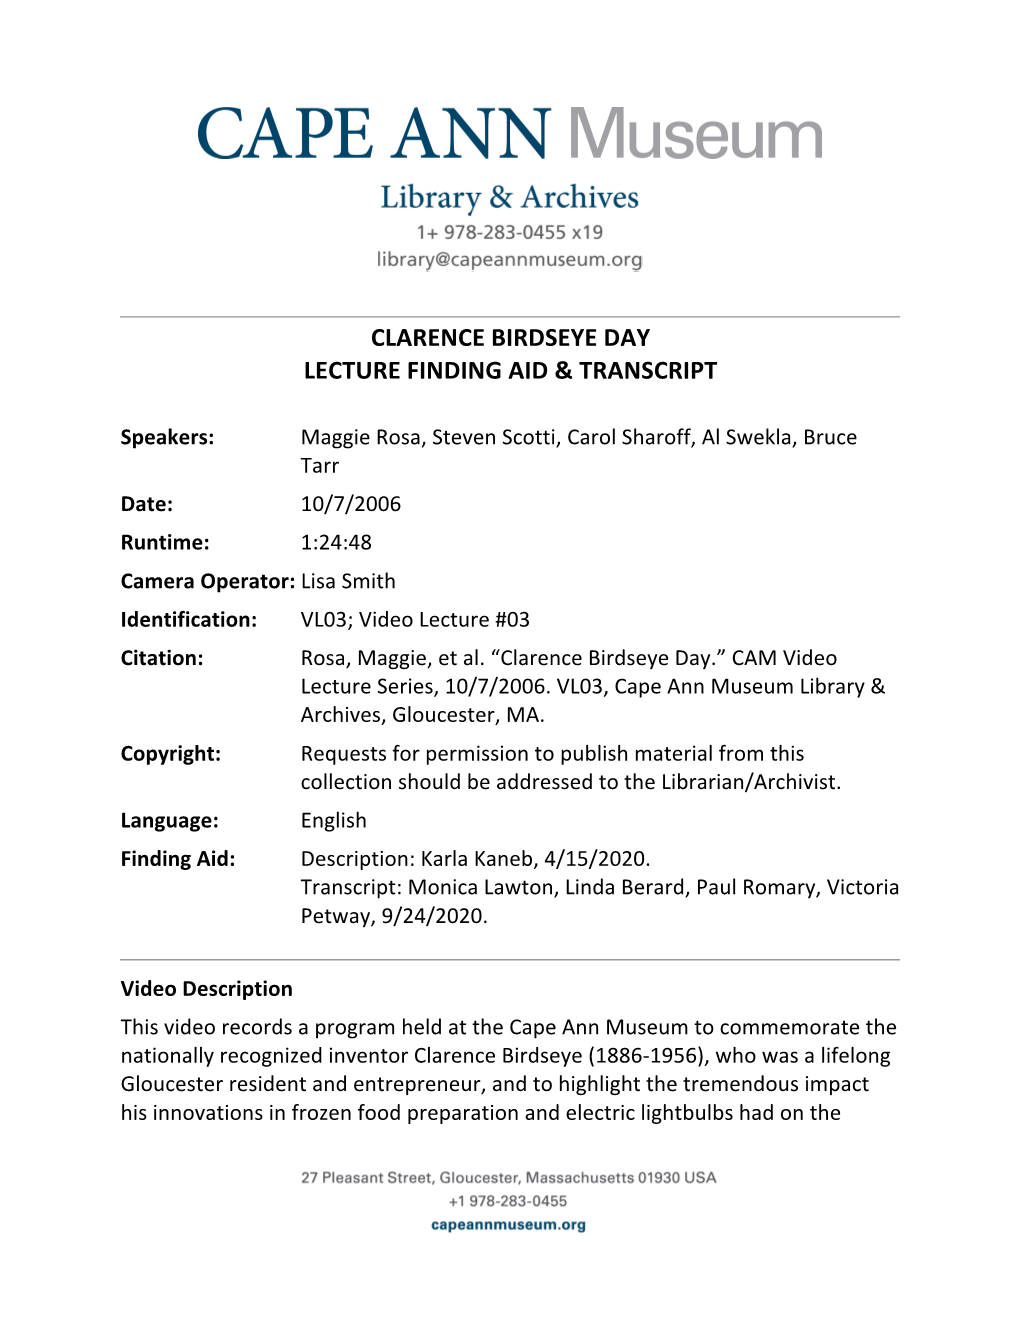 Clarence Birdseye Day Lecture Finding Aid & Transcript